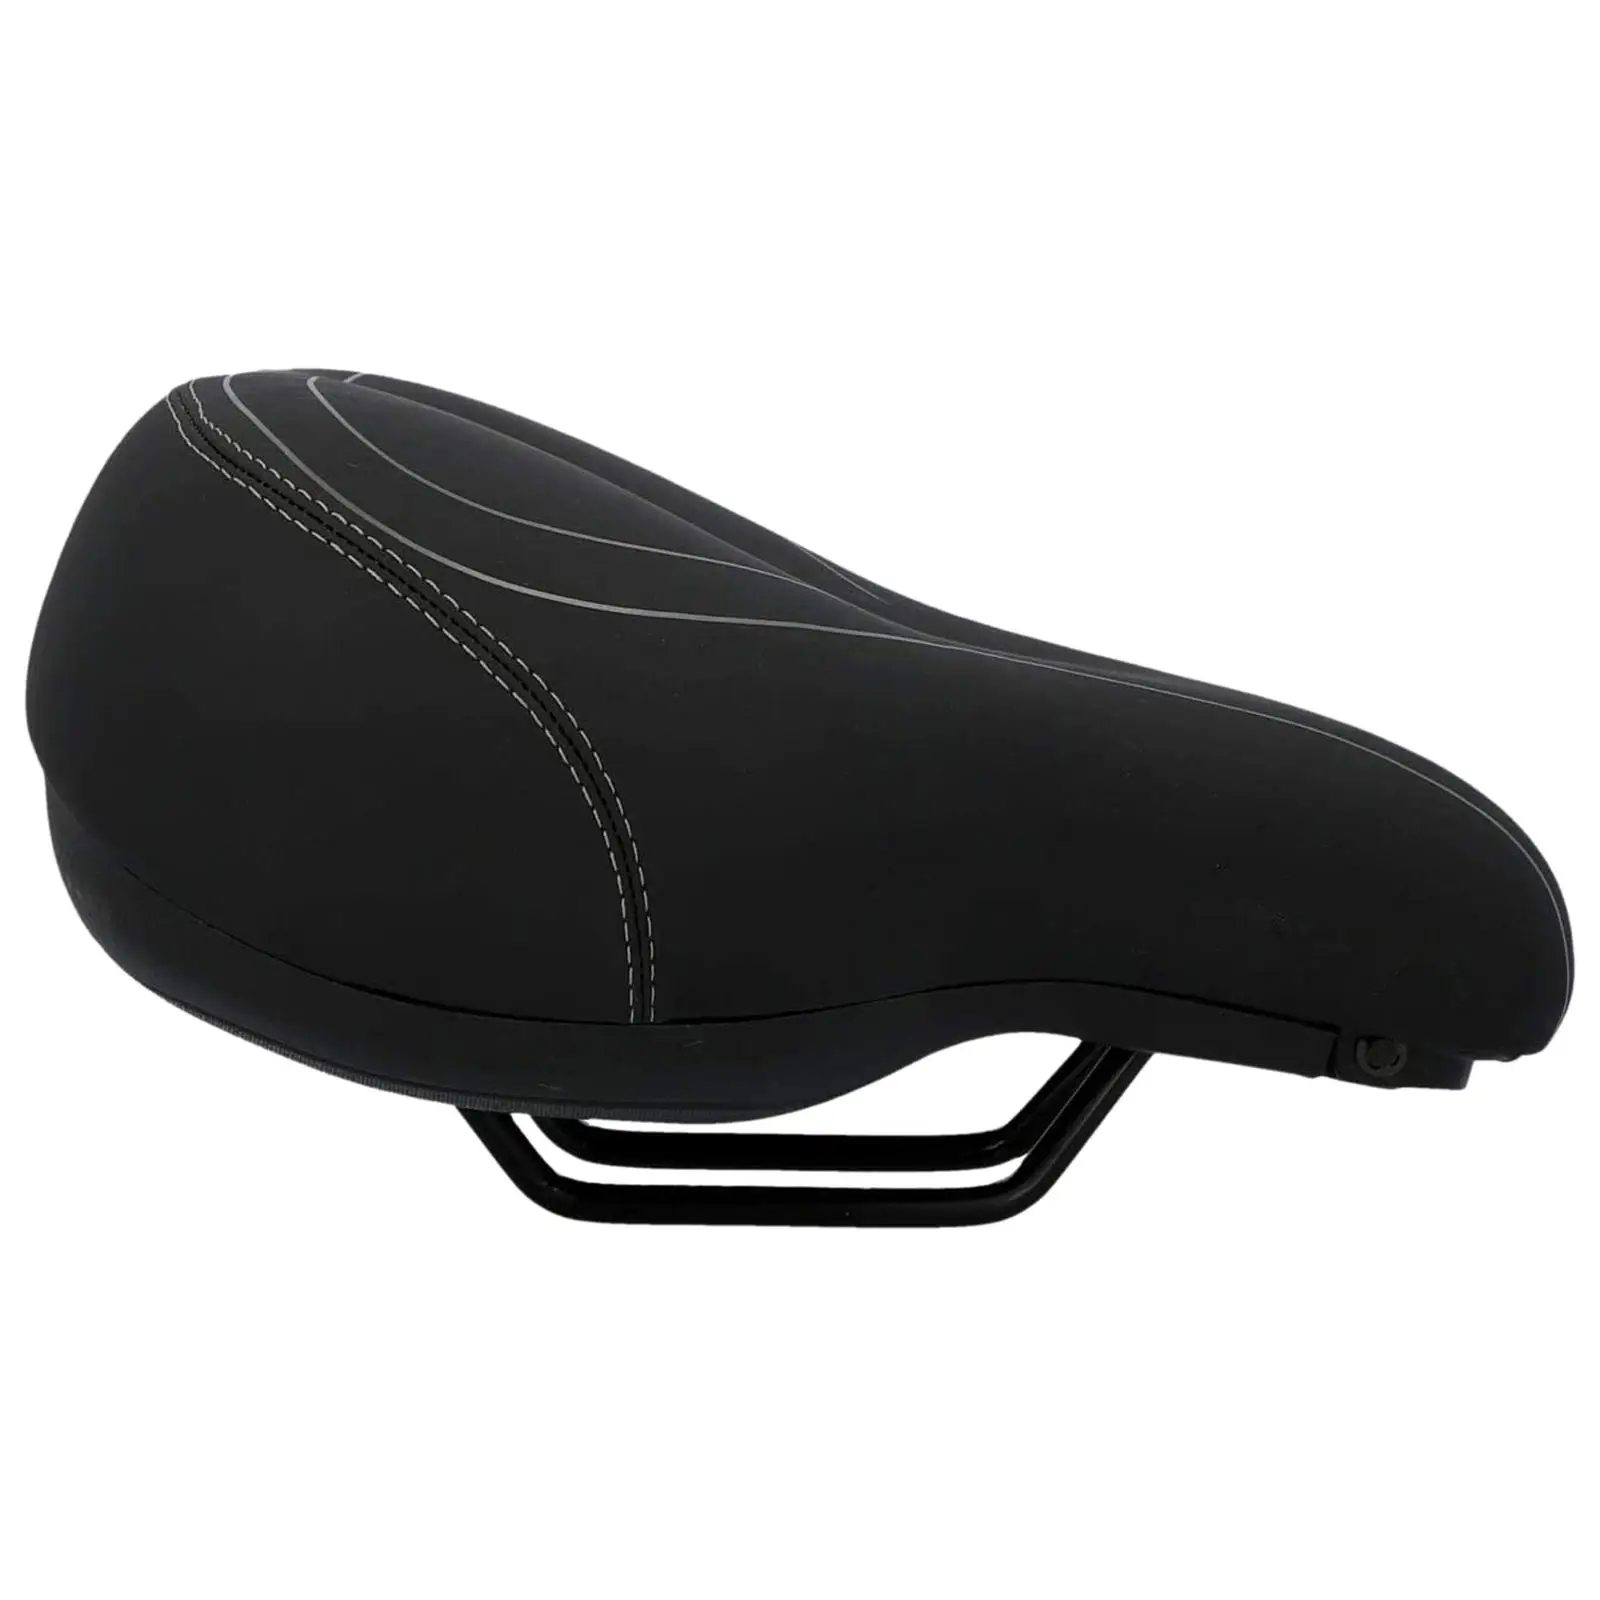 Comfort Bicycle Seat W/ Storage Space Shockproof Waterproof Breathable Biking Seat Cushion Pad for MTB Cycling Accessories